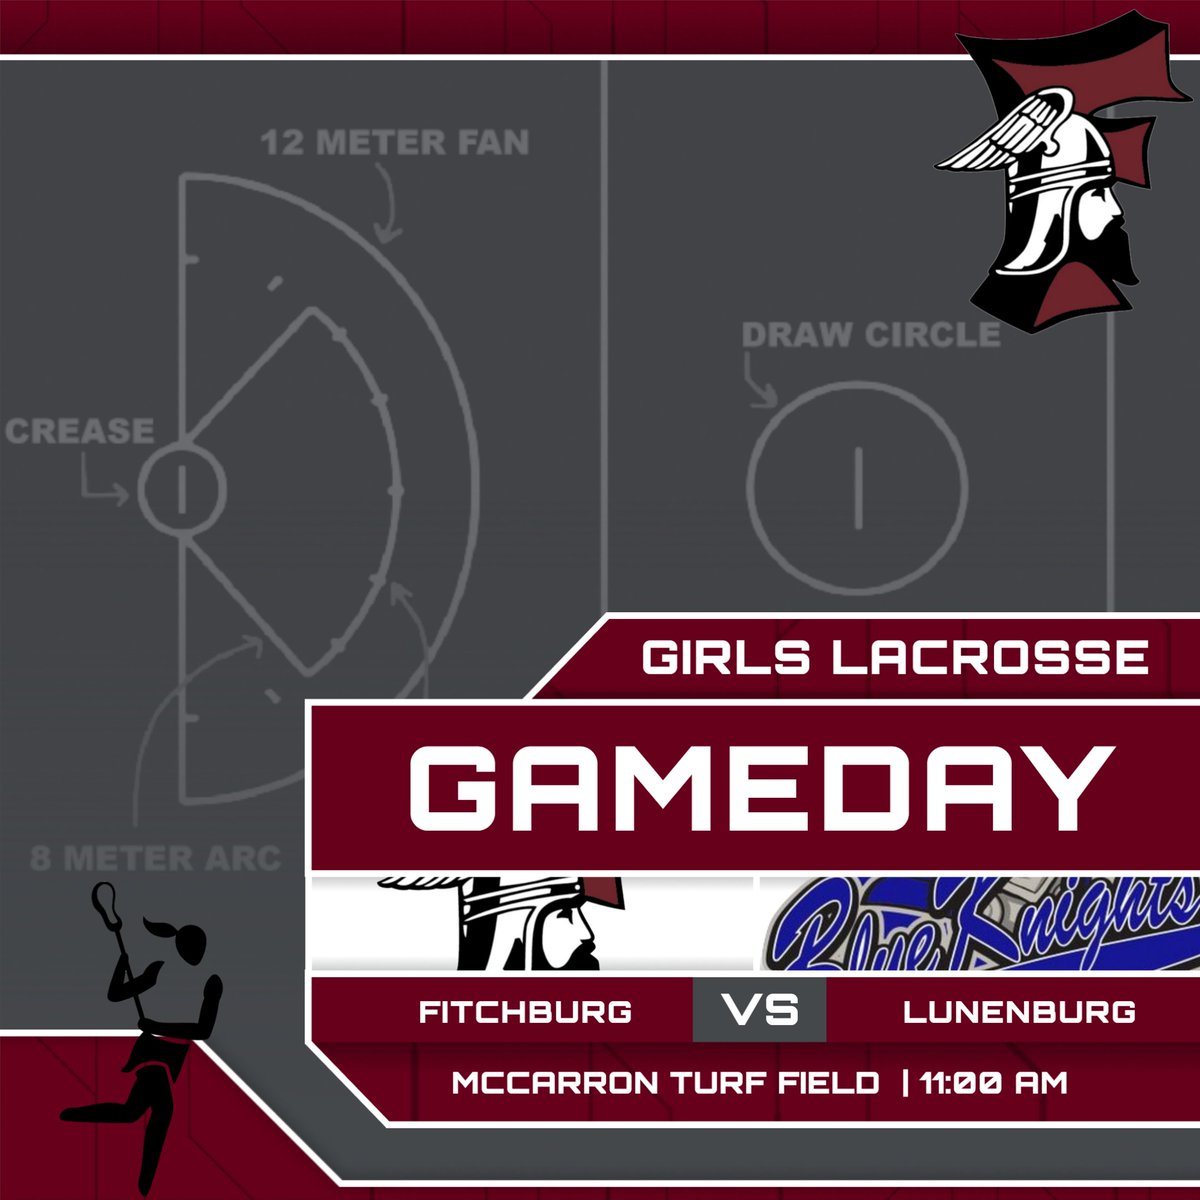 Grab your sticks, load the bus, and its a GAME DAY for The Red & Gray of Girls Lacrosse. 11:00AM First Draw against regional rival Lunenburg. See you there! #AllHailtoTheRedandGray